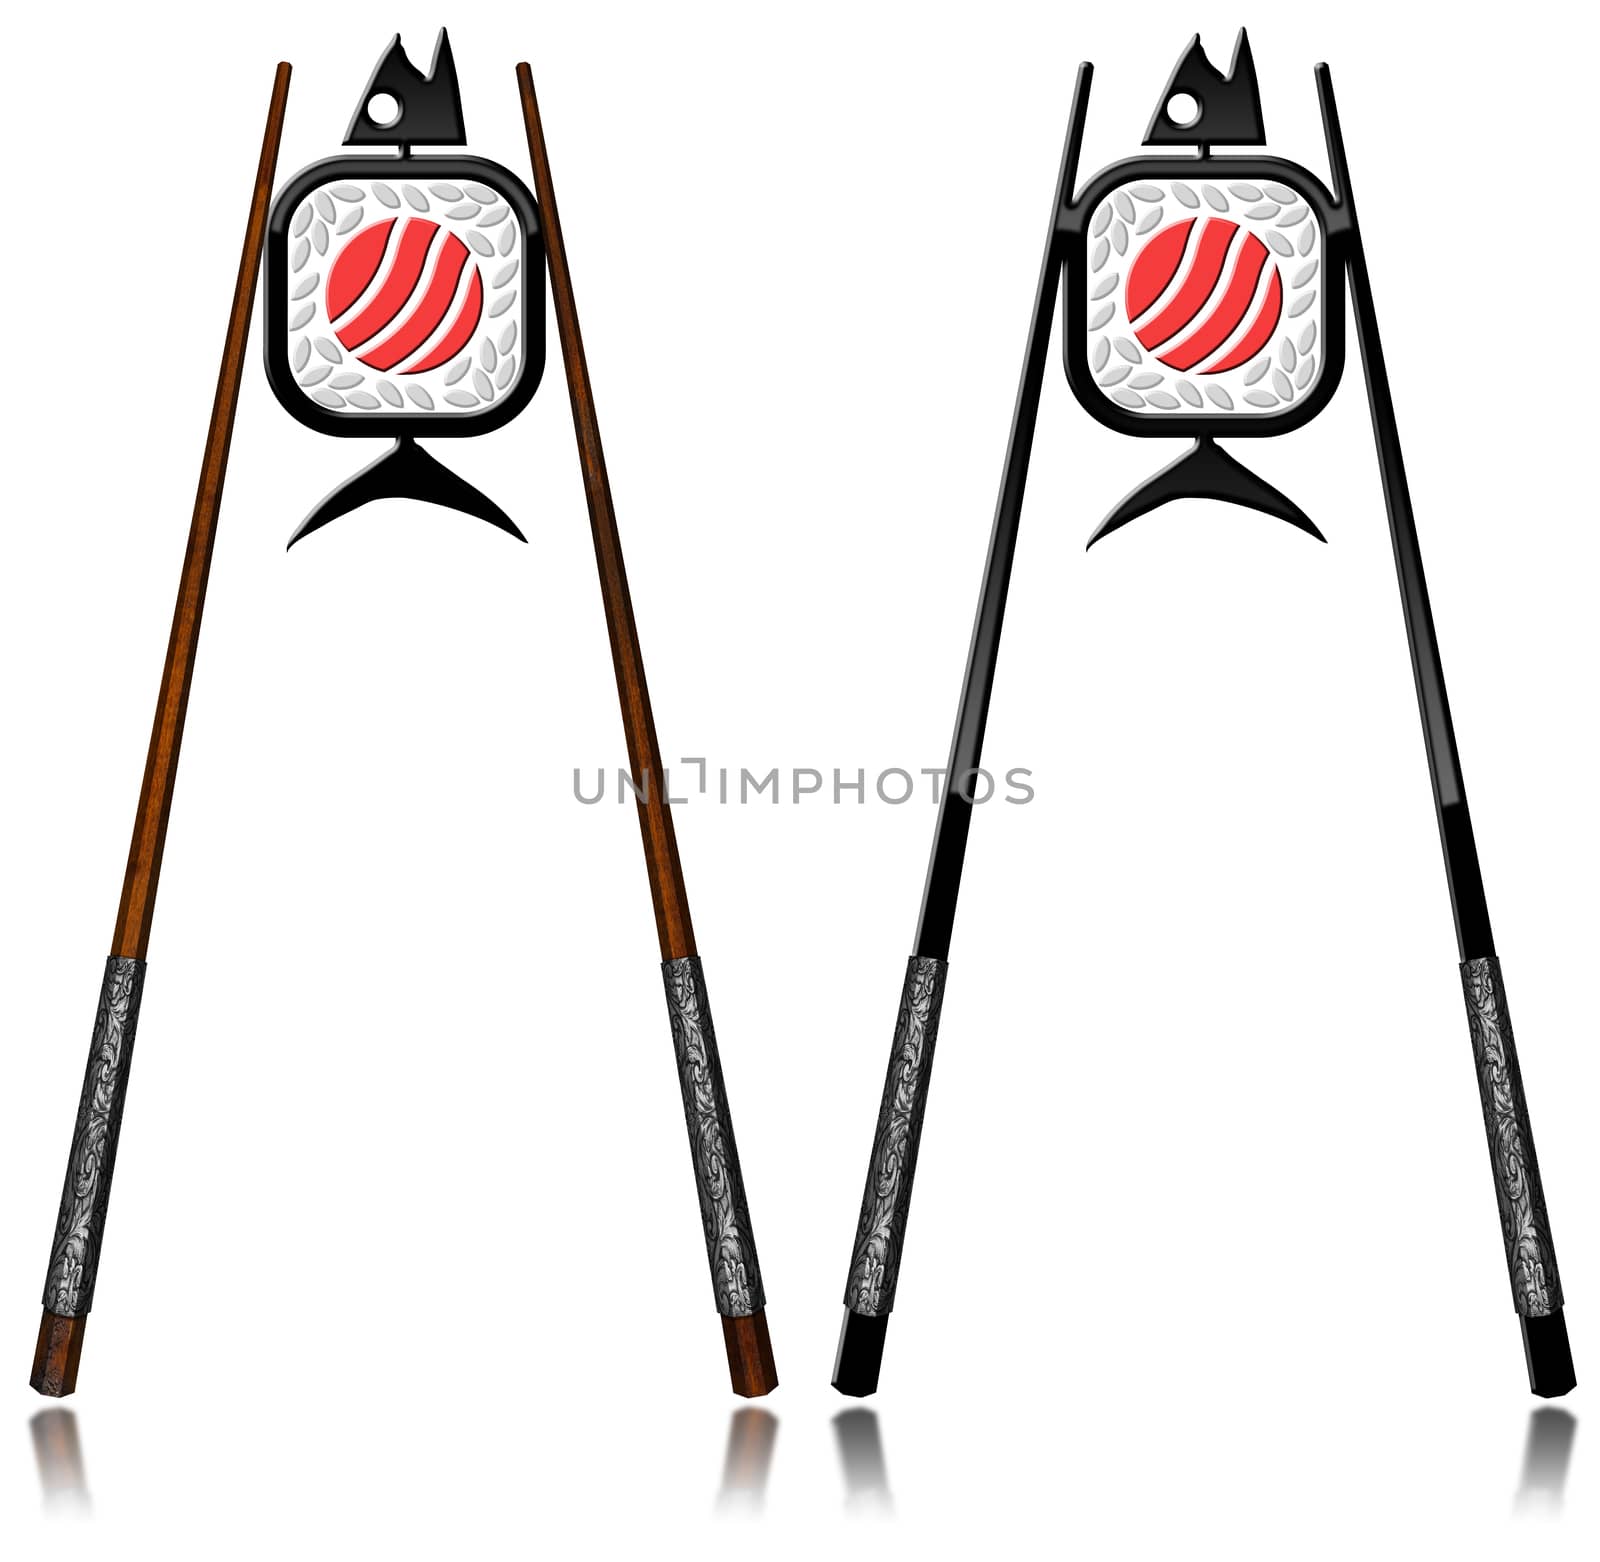 Sushi Symbols - Wooden and Black Chopsticks by catalby